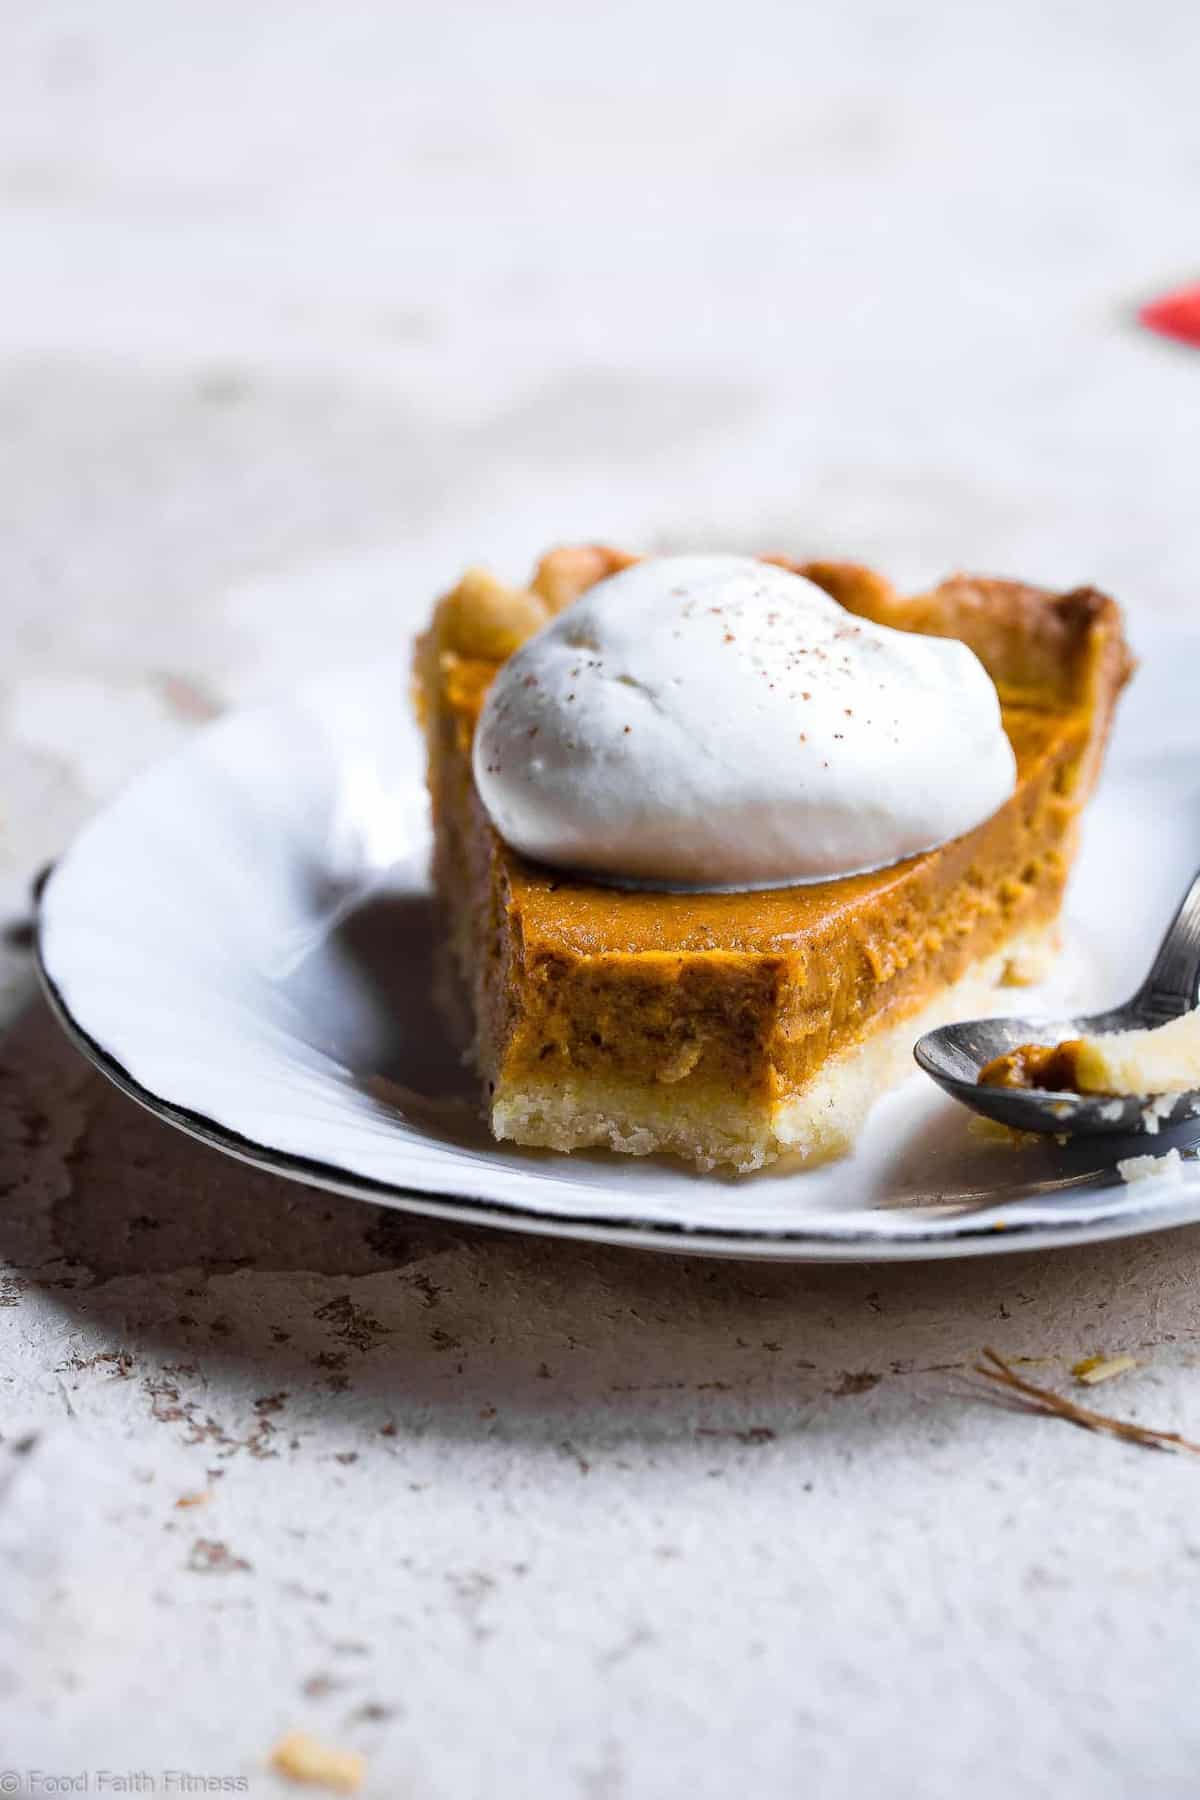 The BEST Low Carb Sugar Free Pumpkin Pie - This paleo friendly, sugar free and low carb pumpkin pie recipe is SO delicious, you will never know it's dairy and gluten free and only 200 calories a slice! Everyone will want this recipe! | #Foodfaithfitness | #Glutenfree #Sugarfree #Paleo #Lowcarb #Healthy